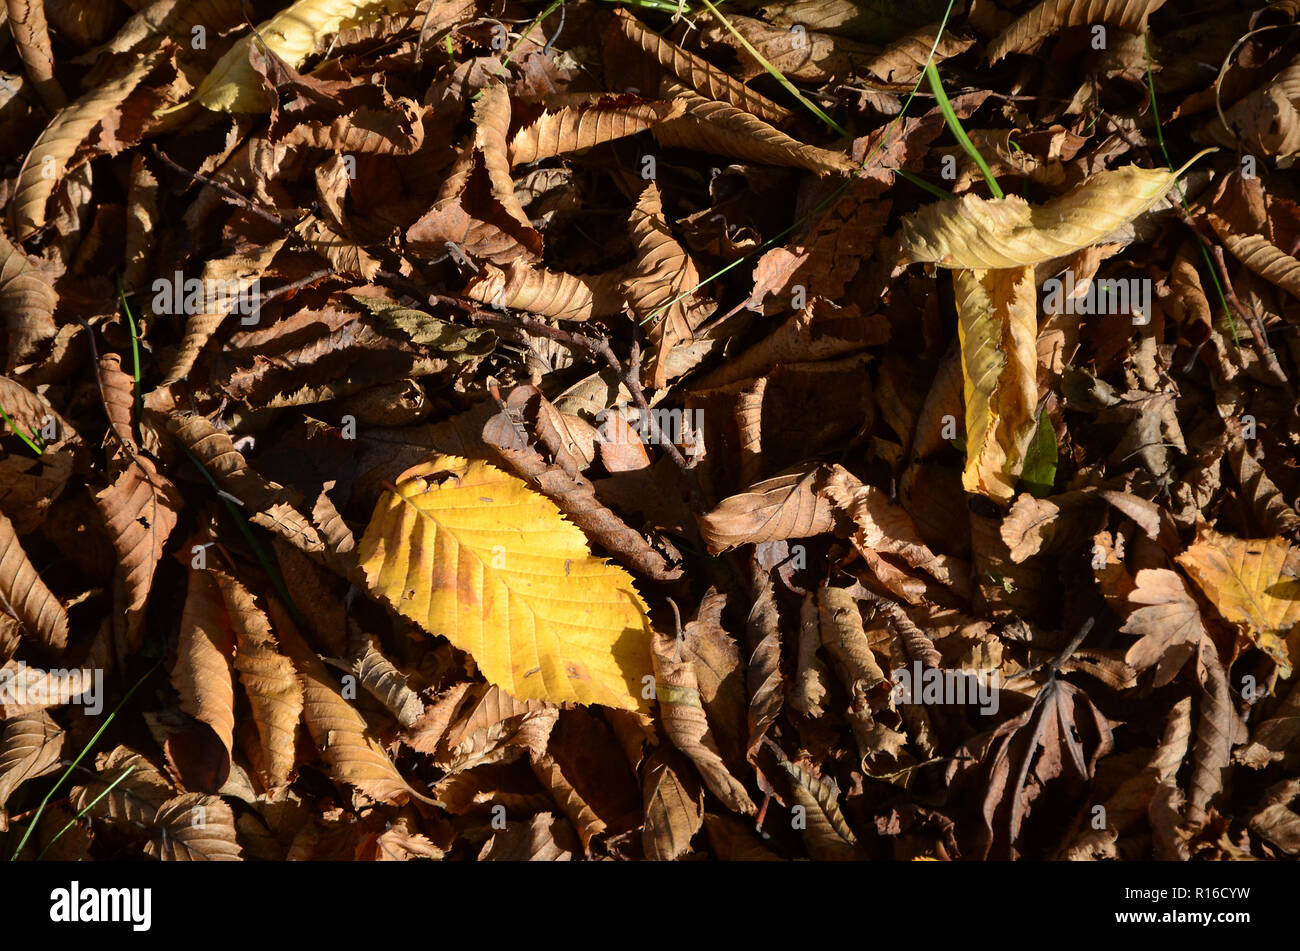 Leaves of different trees in warm autumn colors. Stock Photo